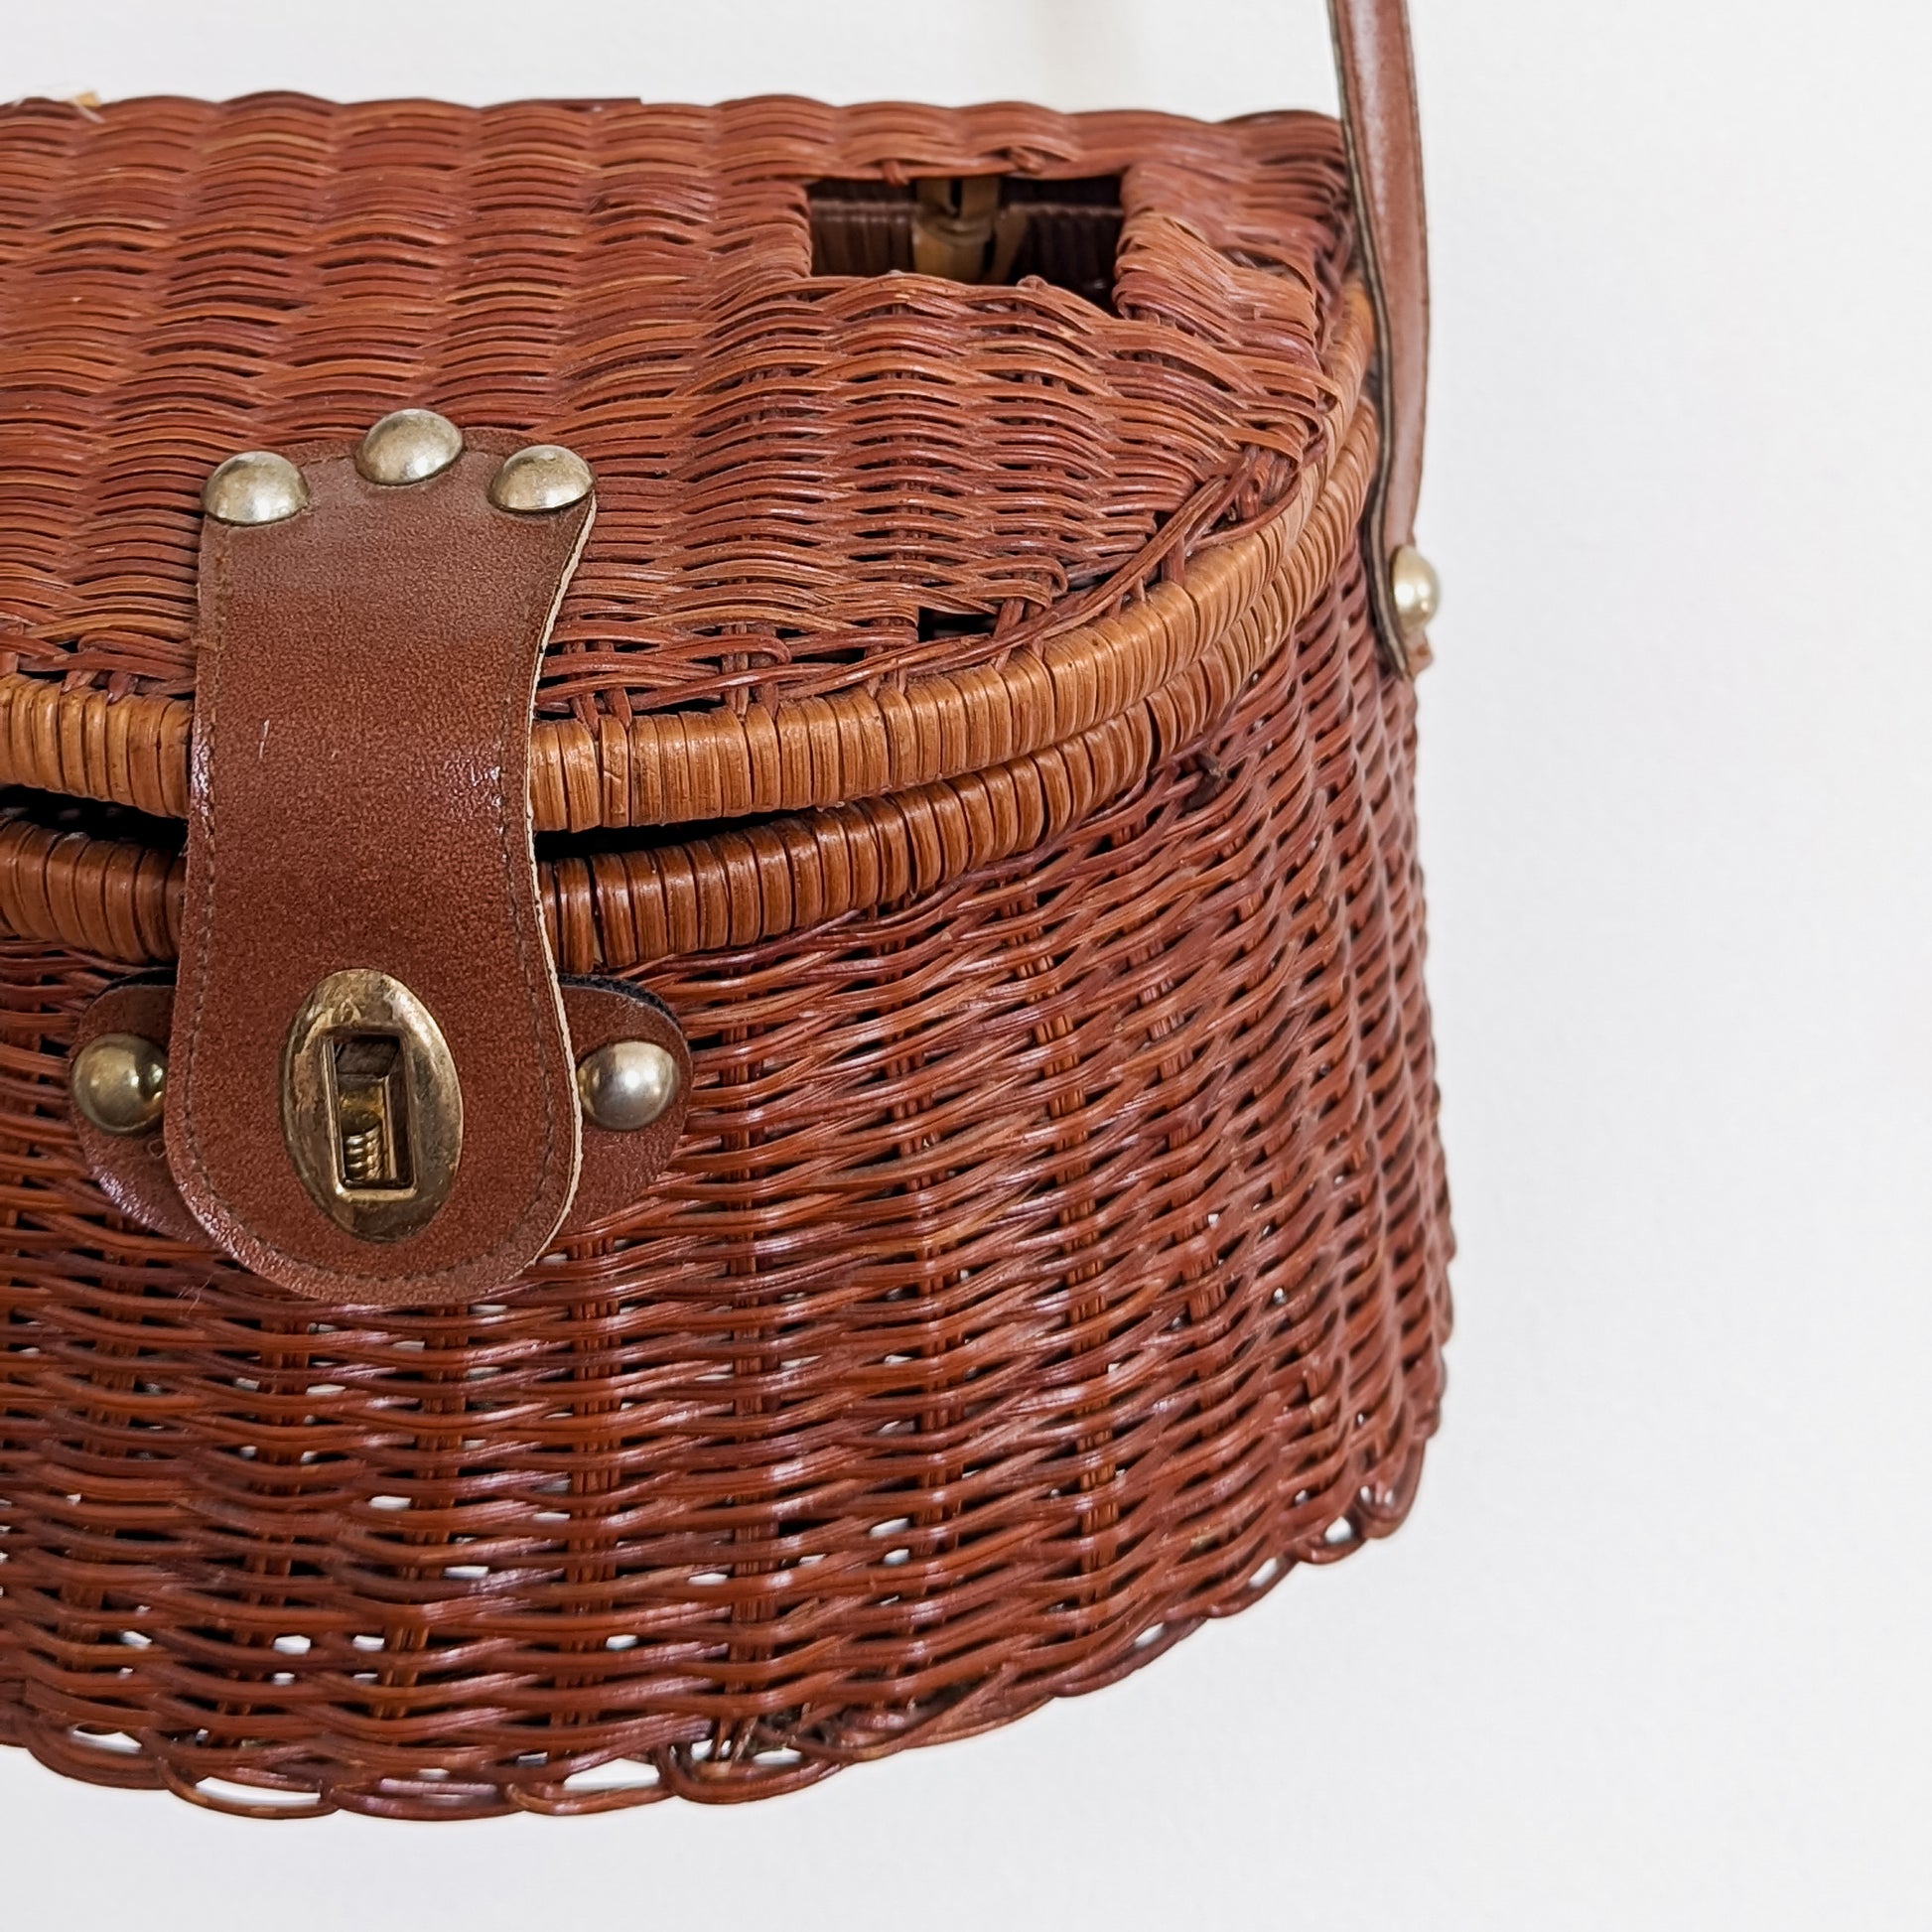 Woven Creel Basket / Foraging Basket with Leather Strap